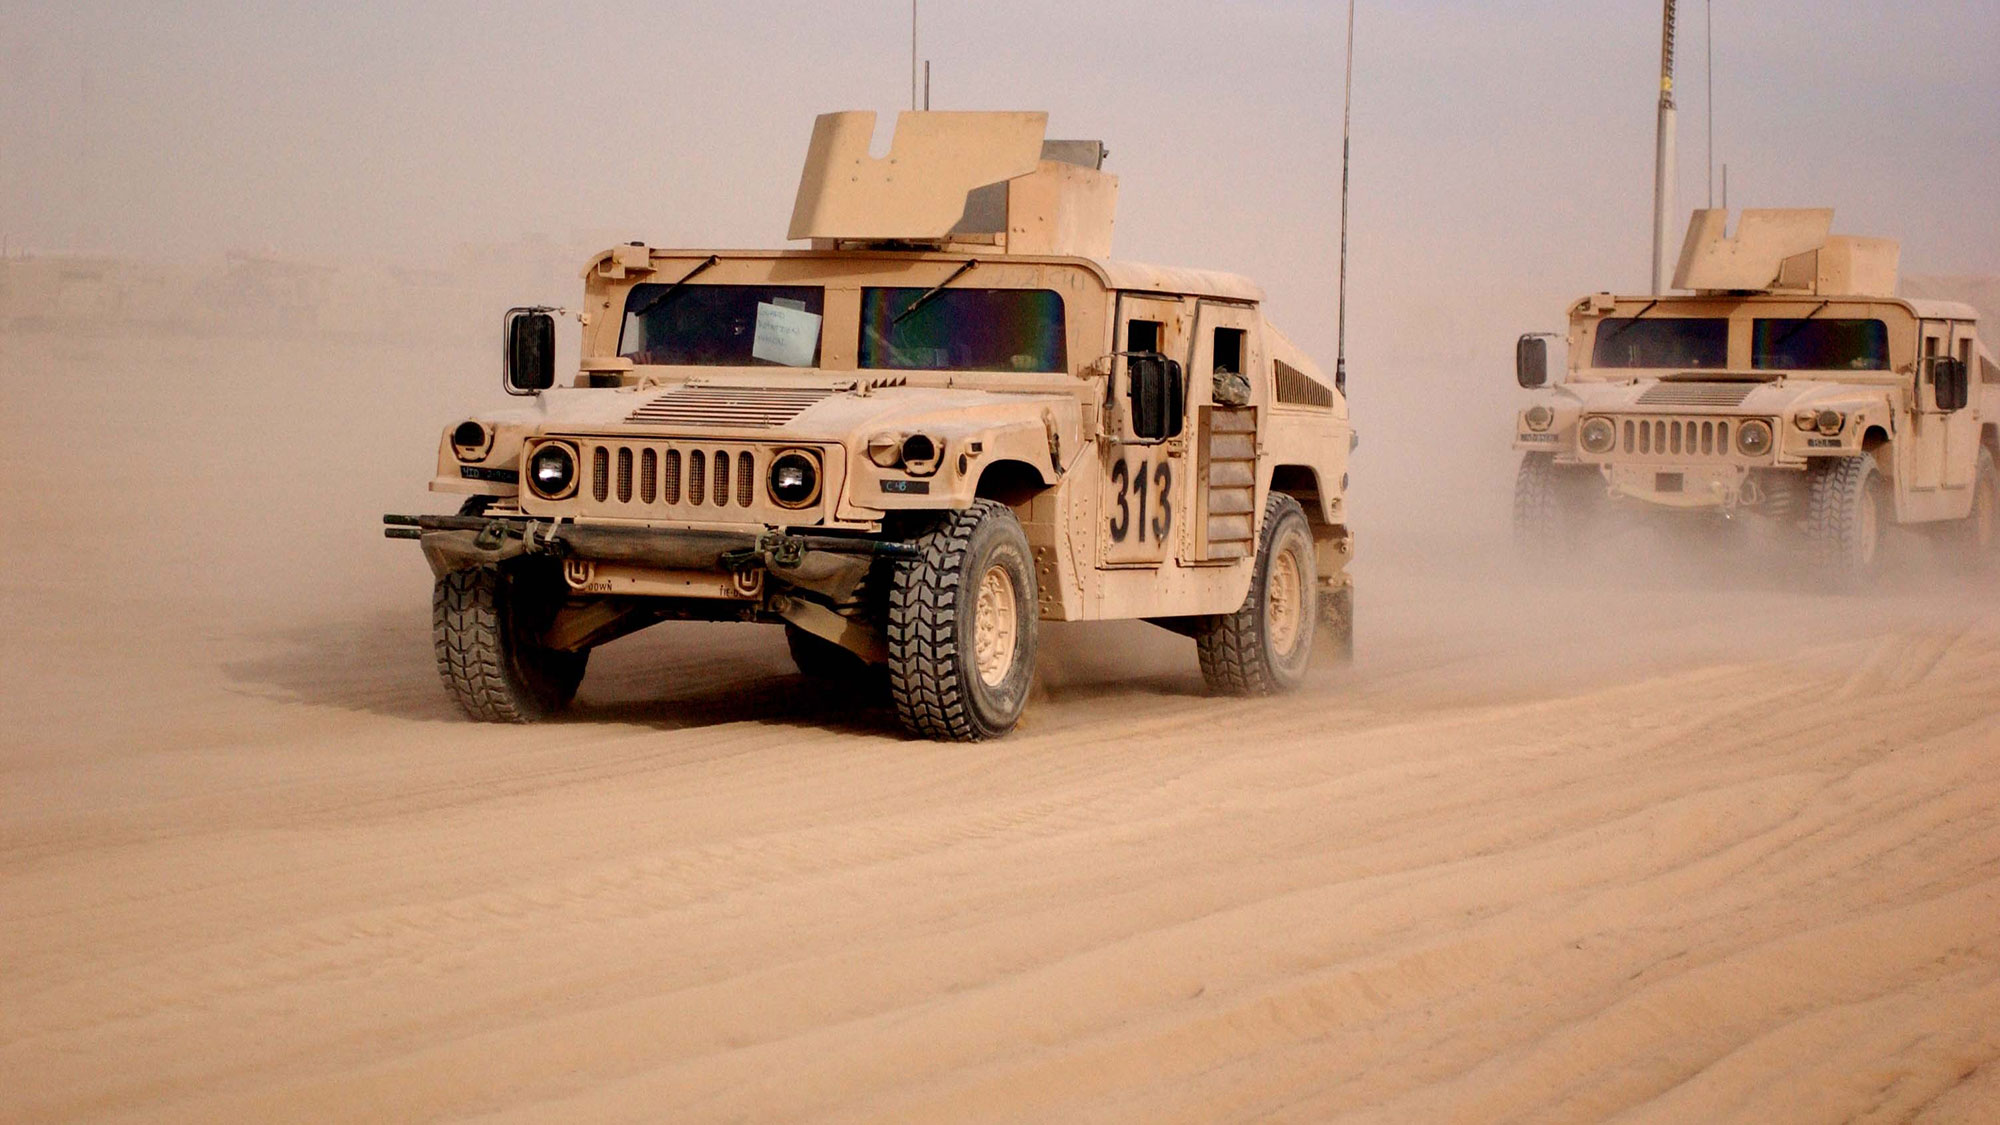 The Pentagon wants to retrofit vehicles to drive themselves